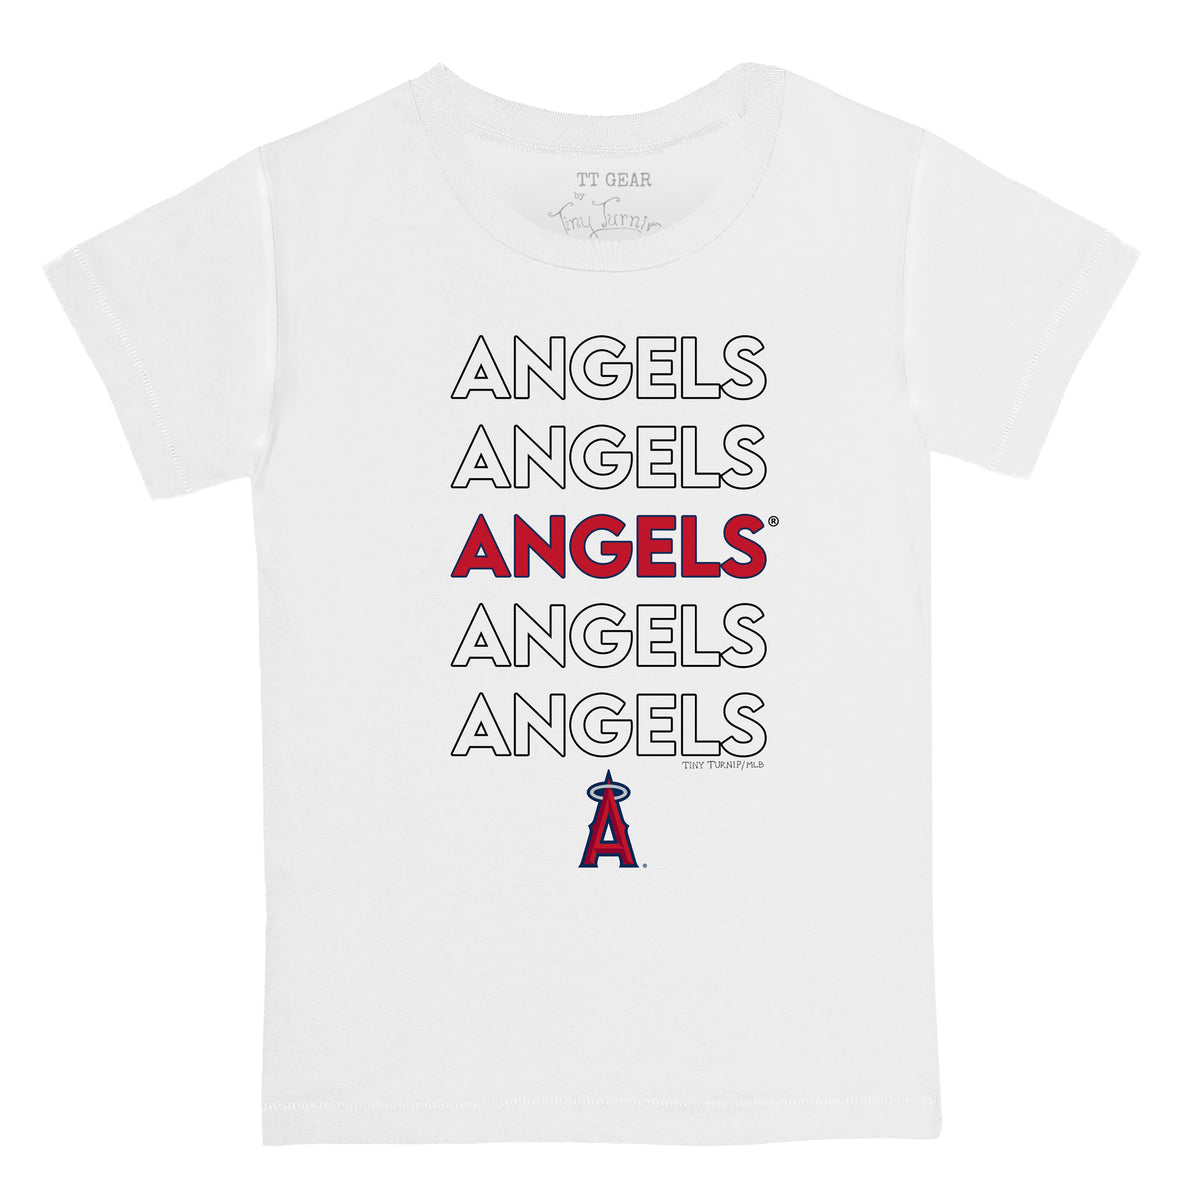 Los Angeles Angels Stacked Tee Shirt